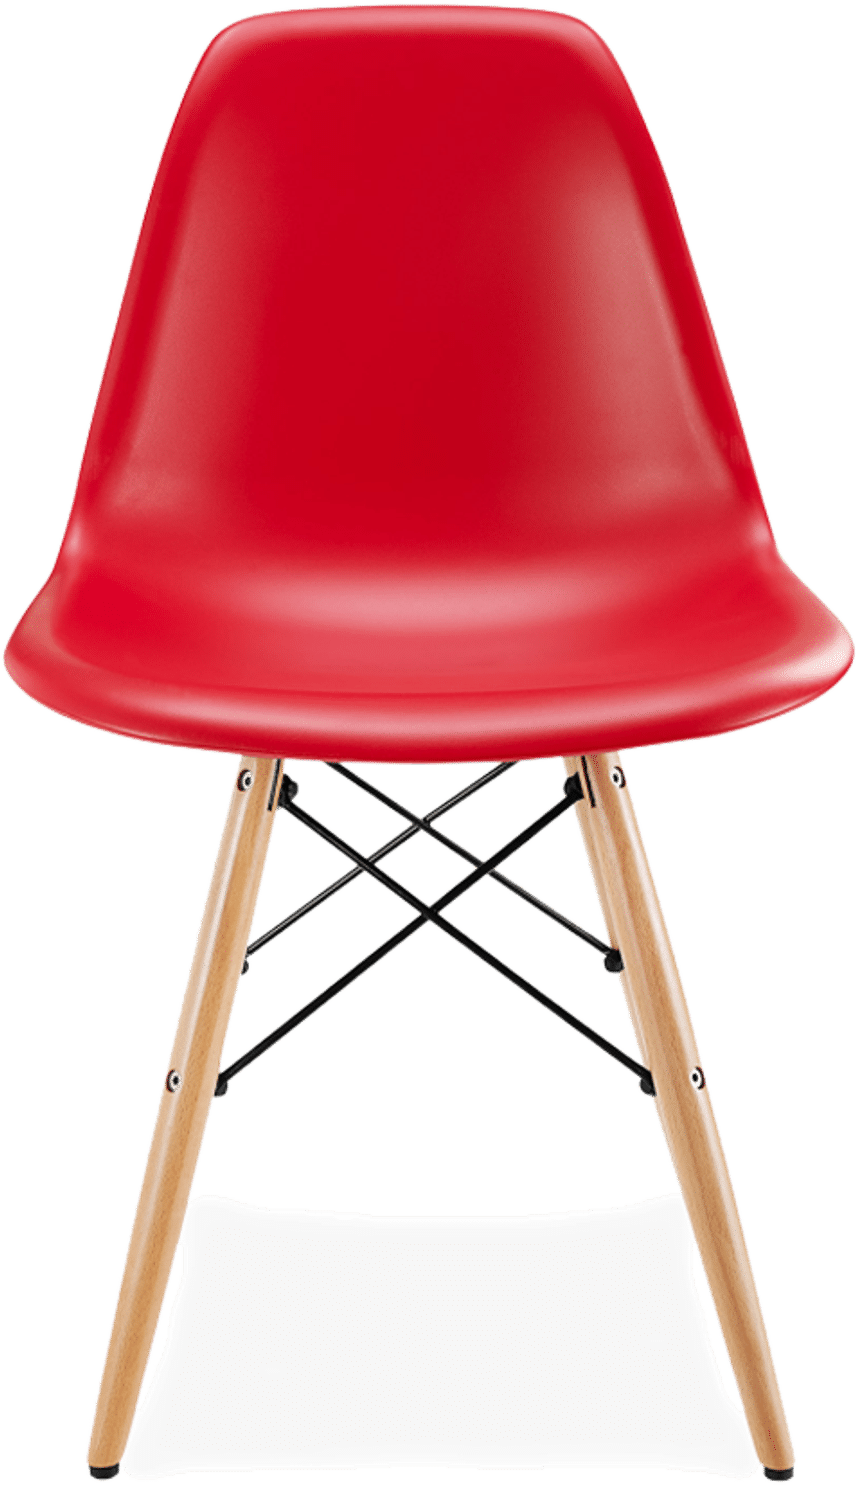 Silla DSW Style Red/Light Wood image.